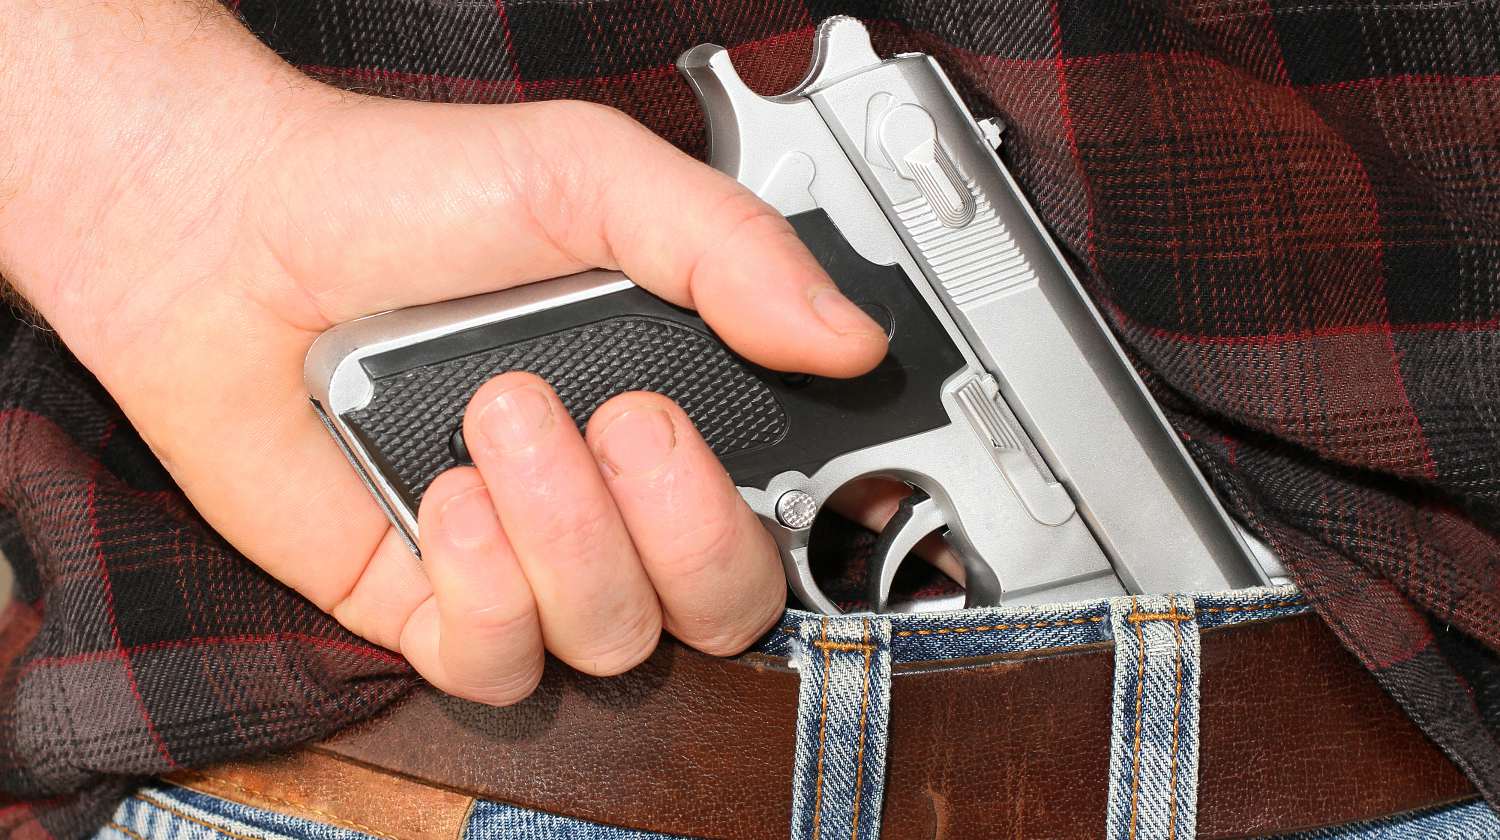 Pistol concealed in a man's waistband | No-Permit Concealed Carry Now Allowed In Maine | Featured